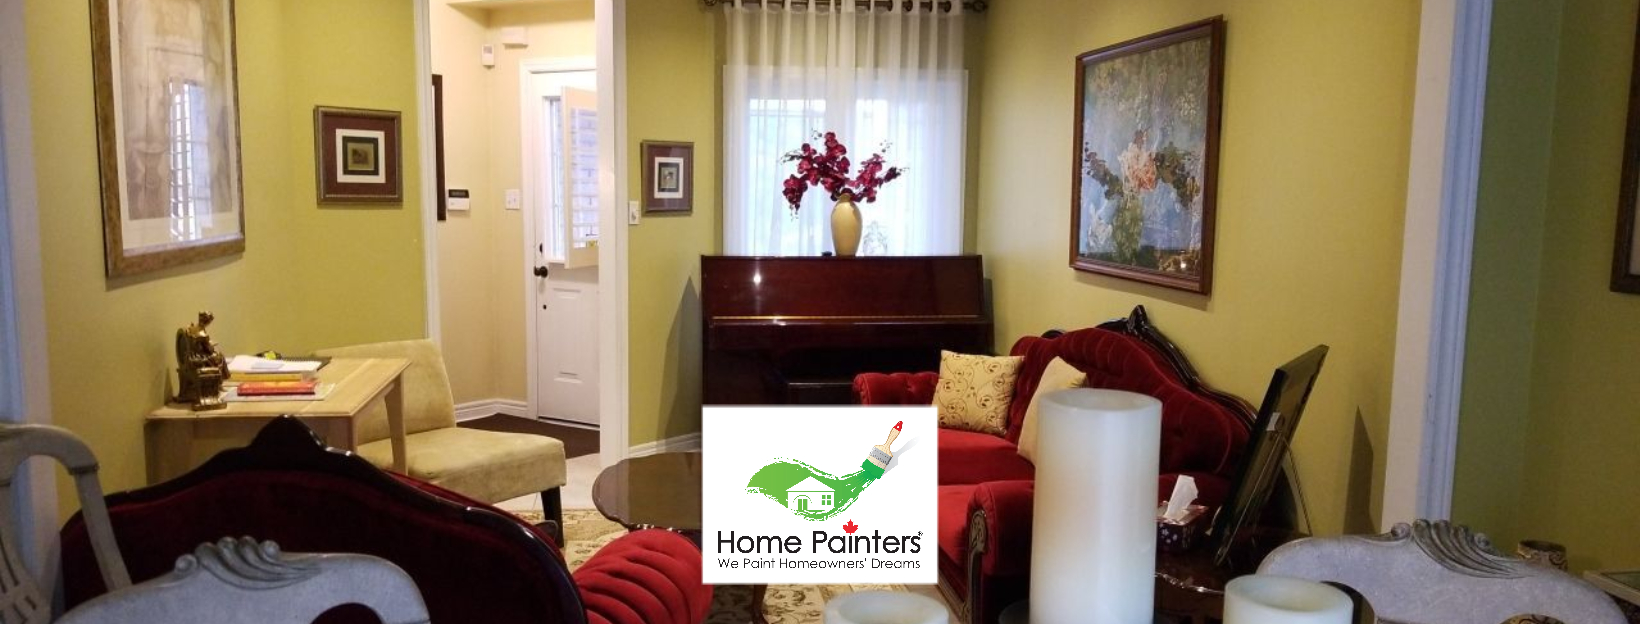 interior painting job by home painters toronto painting company